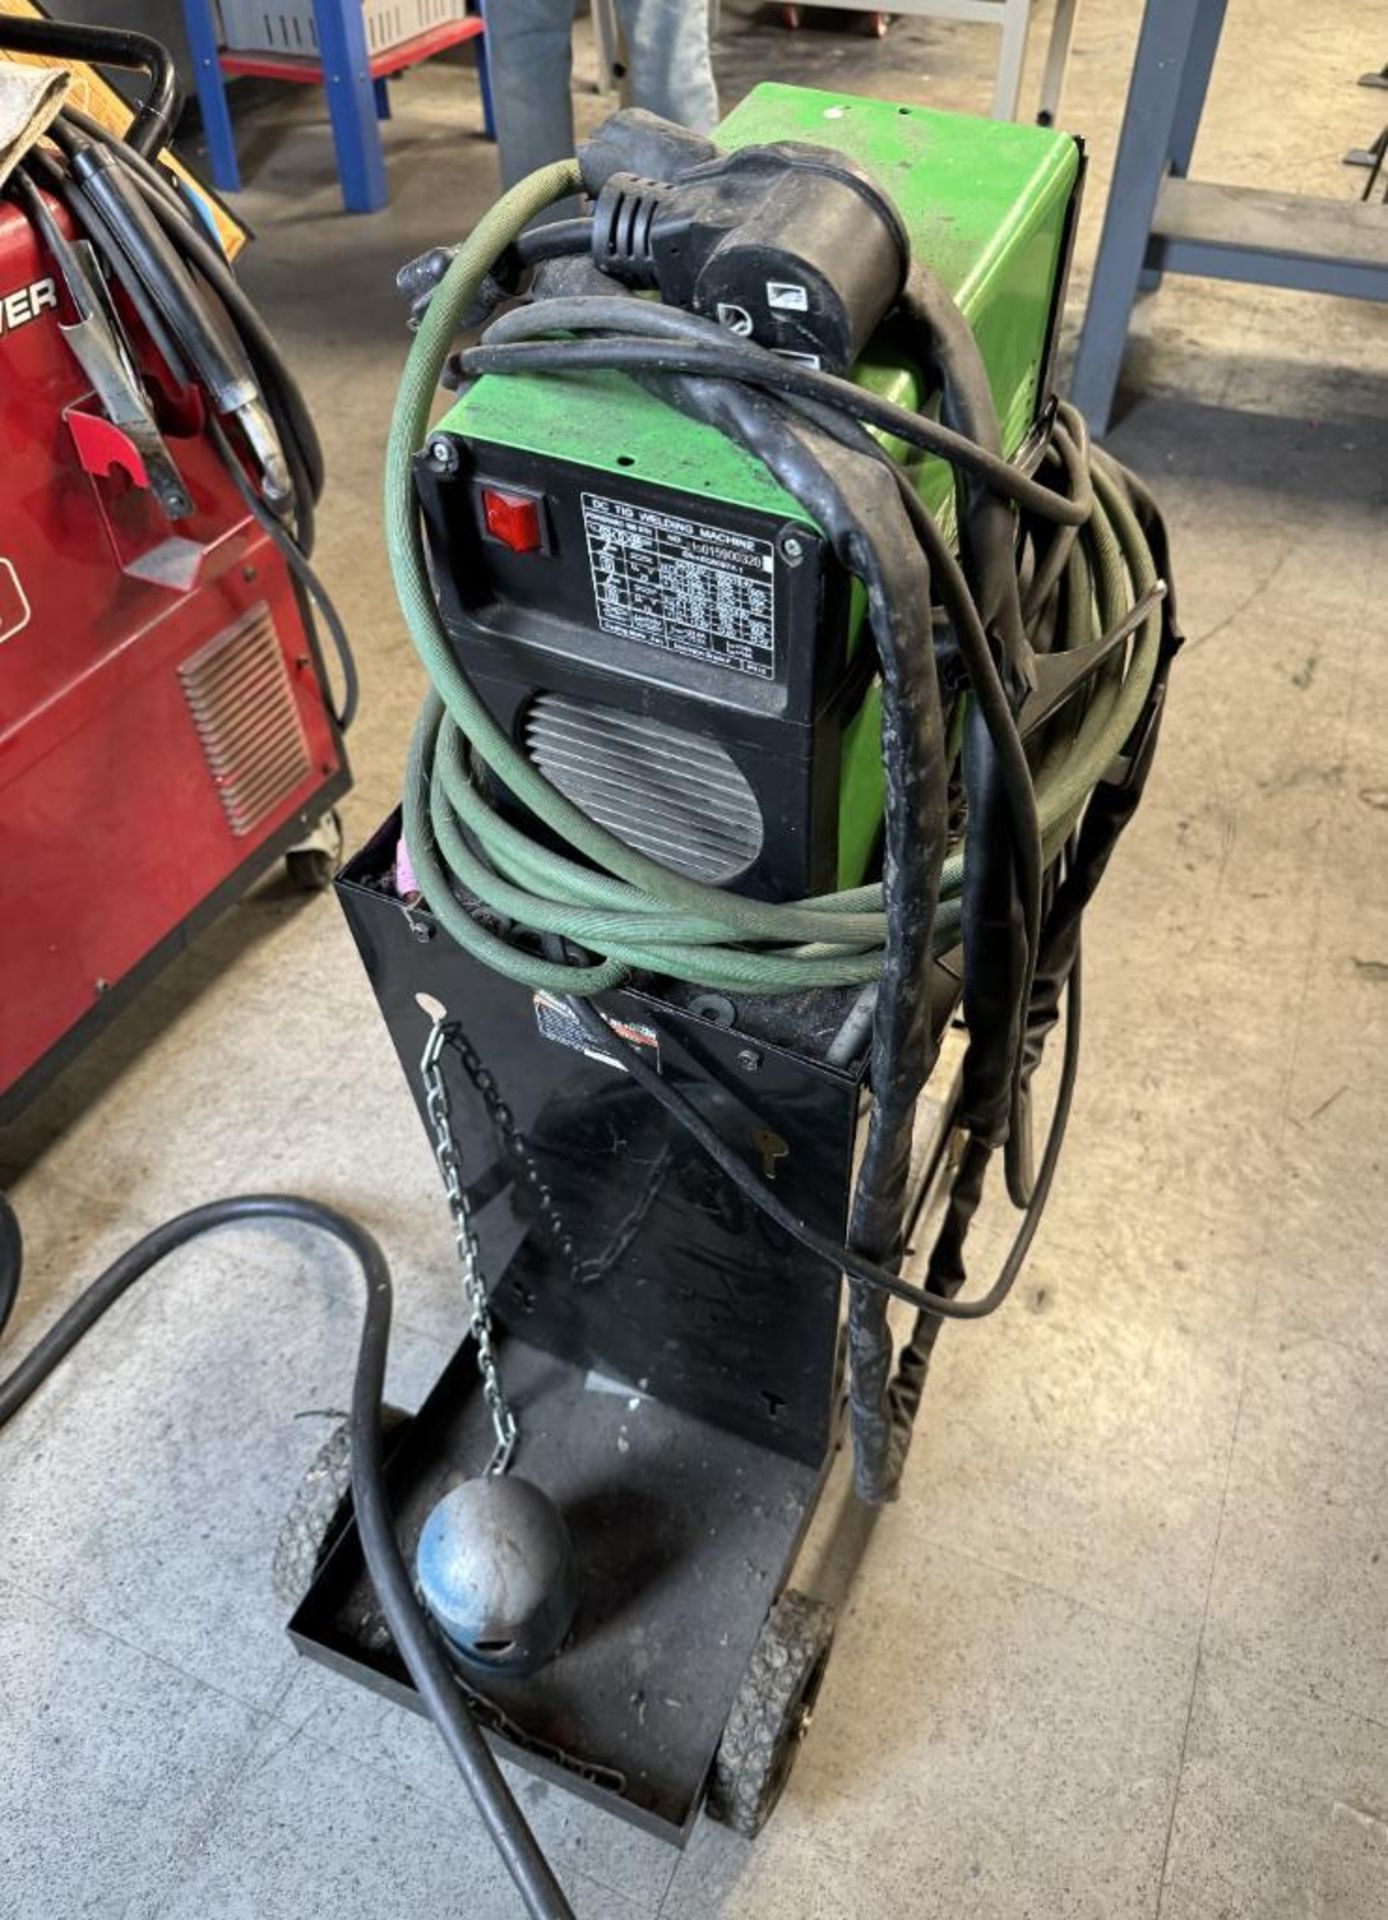 Everlast Powerarc 160 STH DC Tig Welding Machine, Serial# 015900320. With cart. - Image 3 of 5